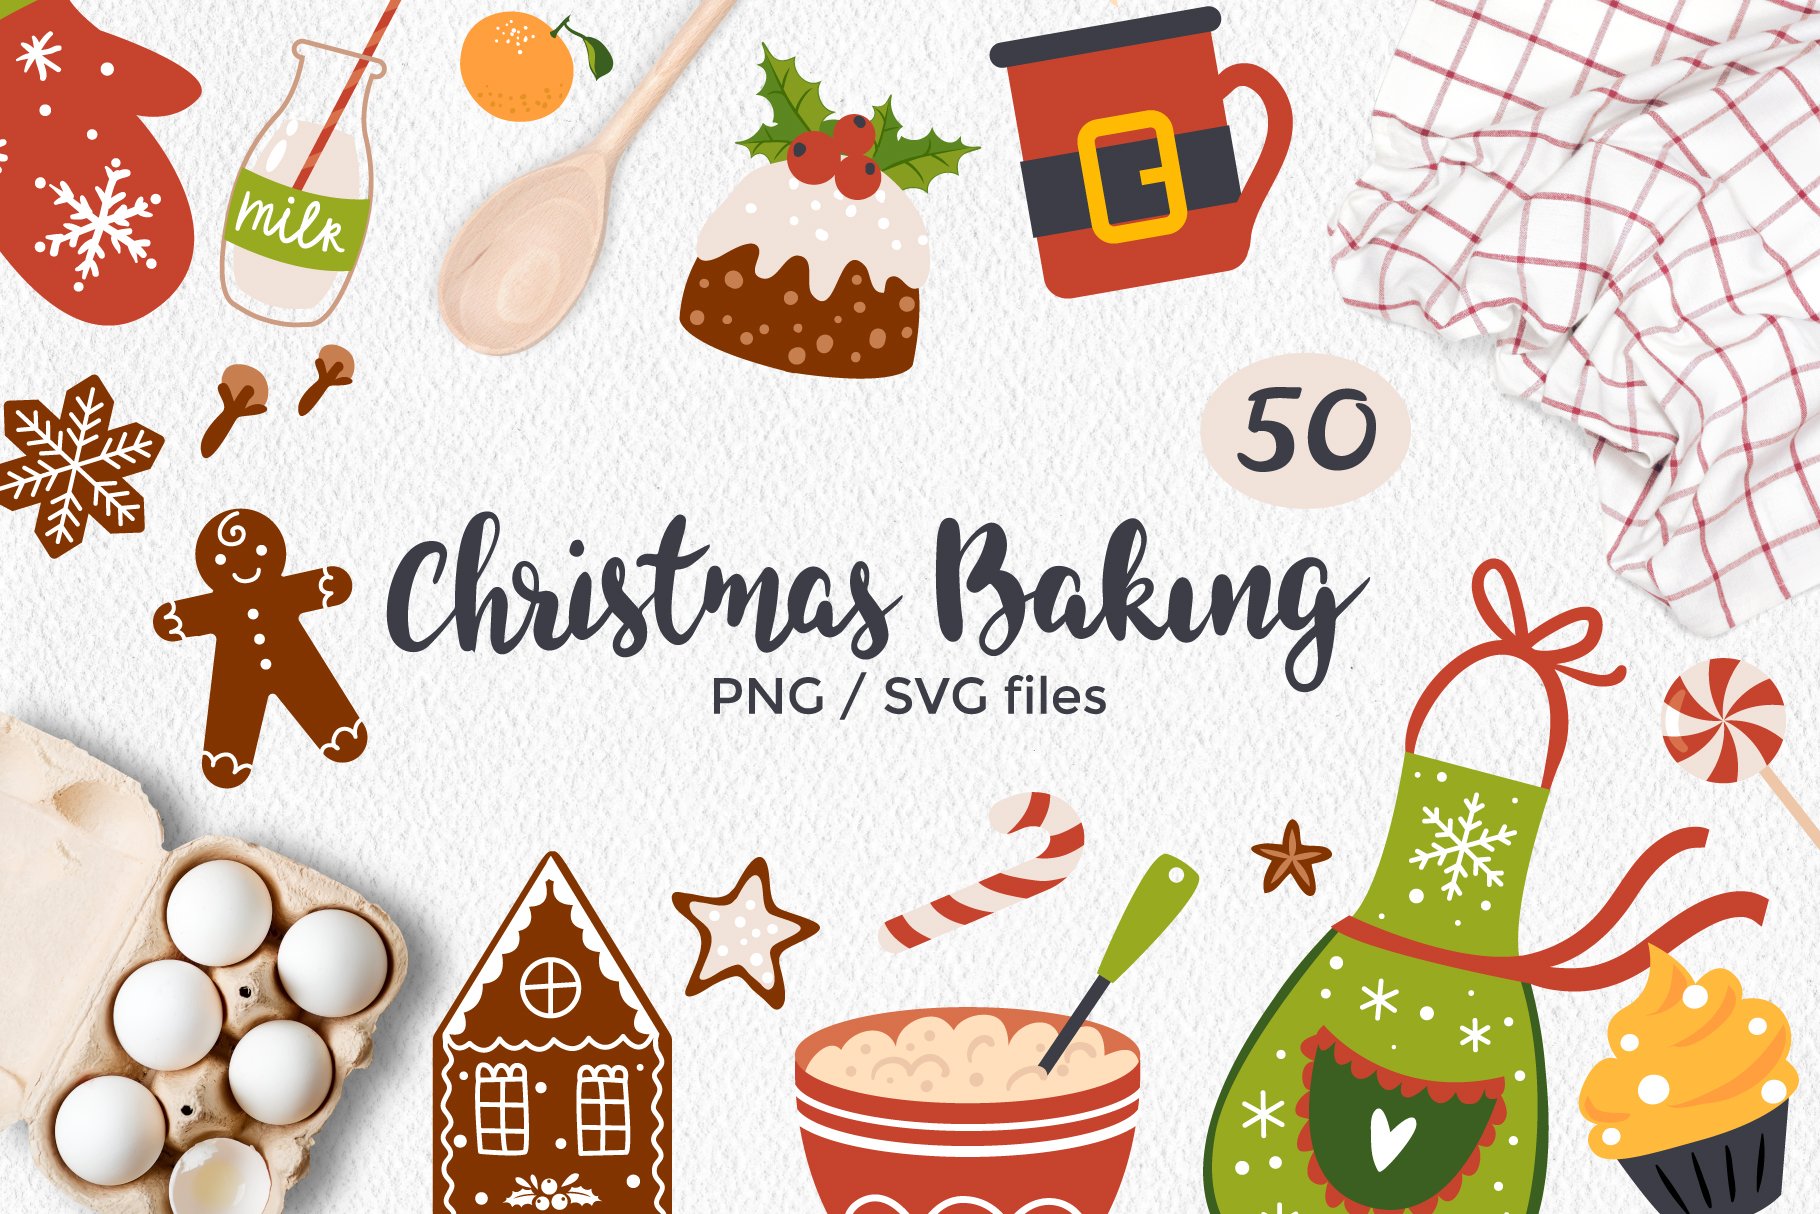 Christmas Baking Clipart cover image.